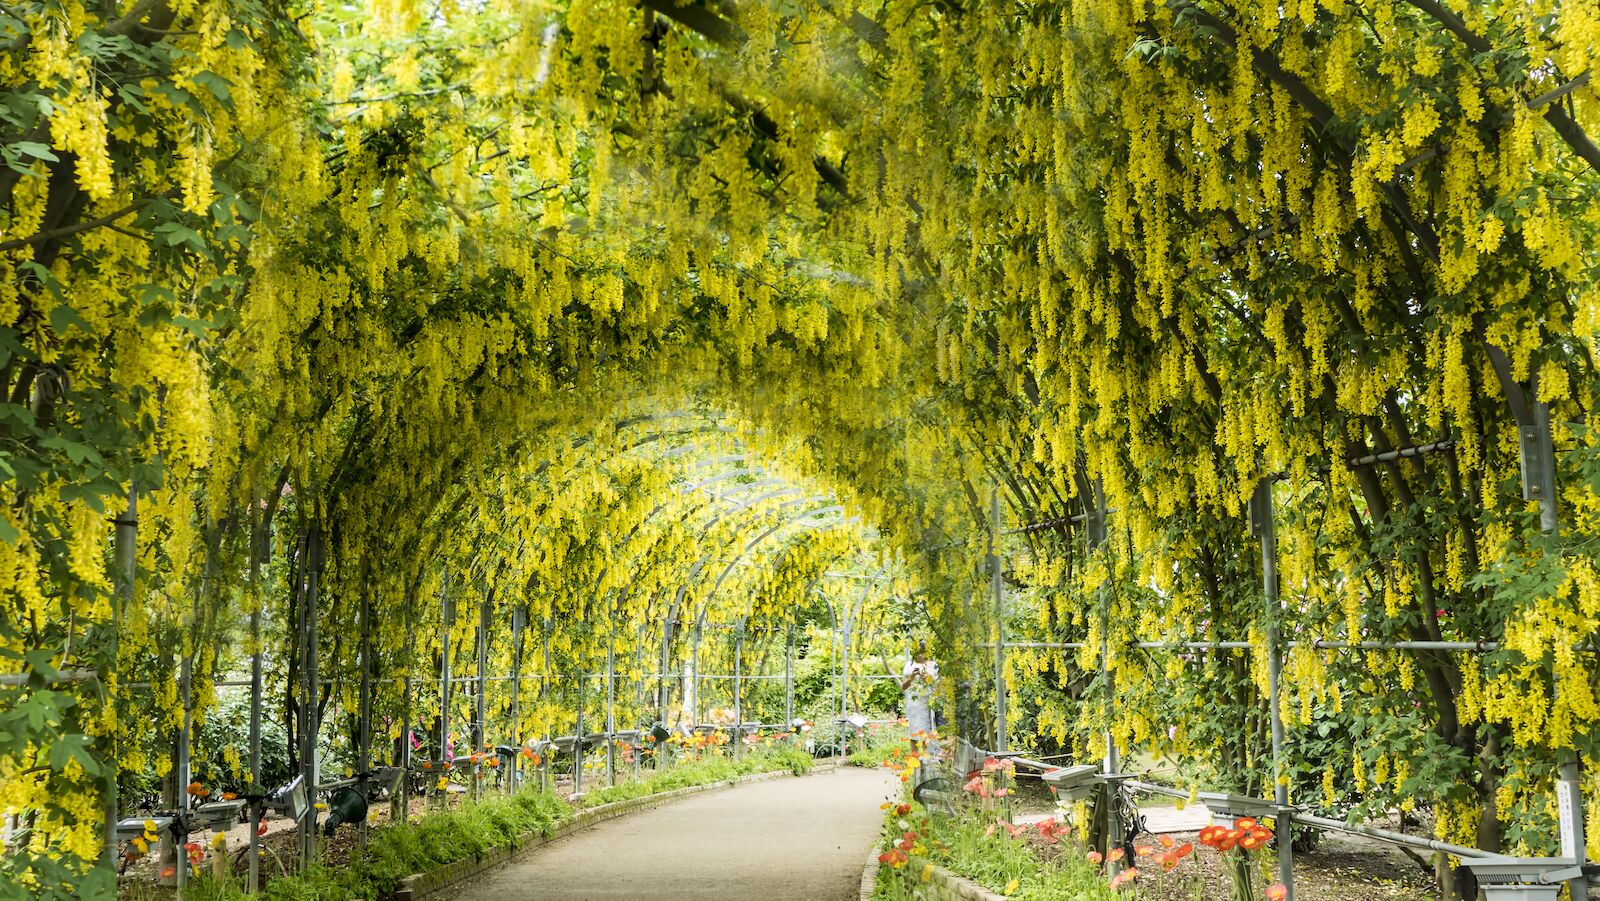 Tunnel of laburnums in bloom at the Ashikaga Flower Park in Japan where the Great Wisteria Festival takes place.